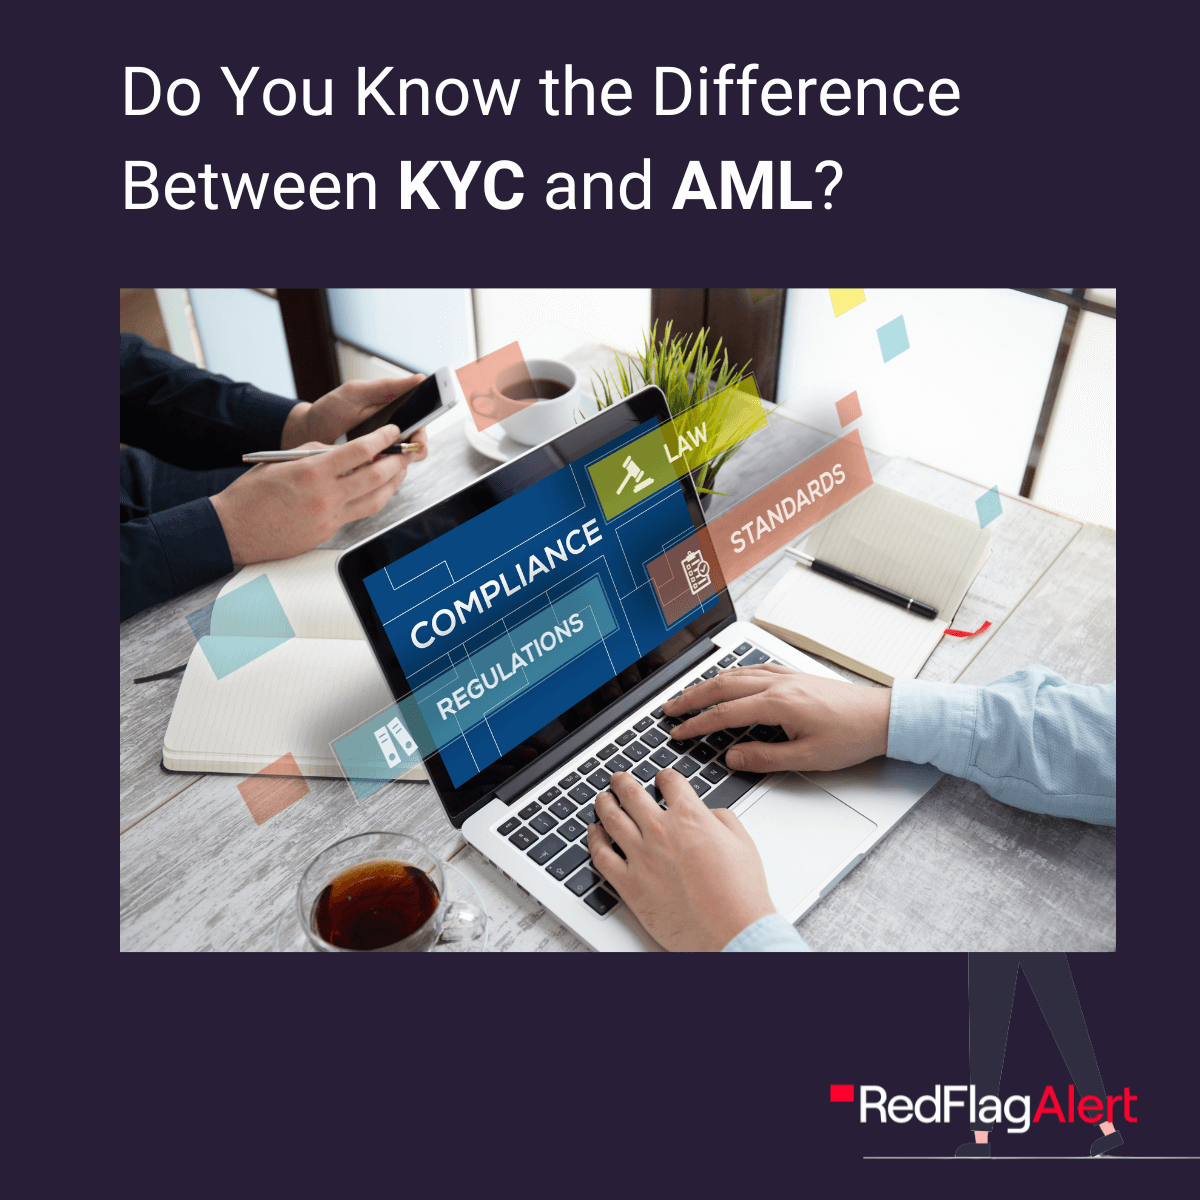 Do You Know the Difference Between KYC and AML?